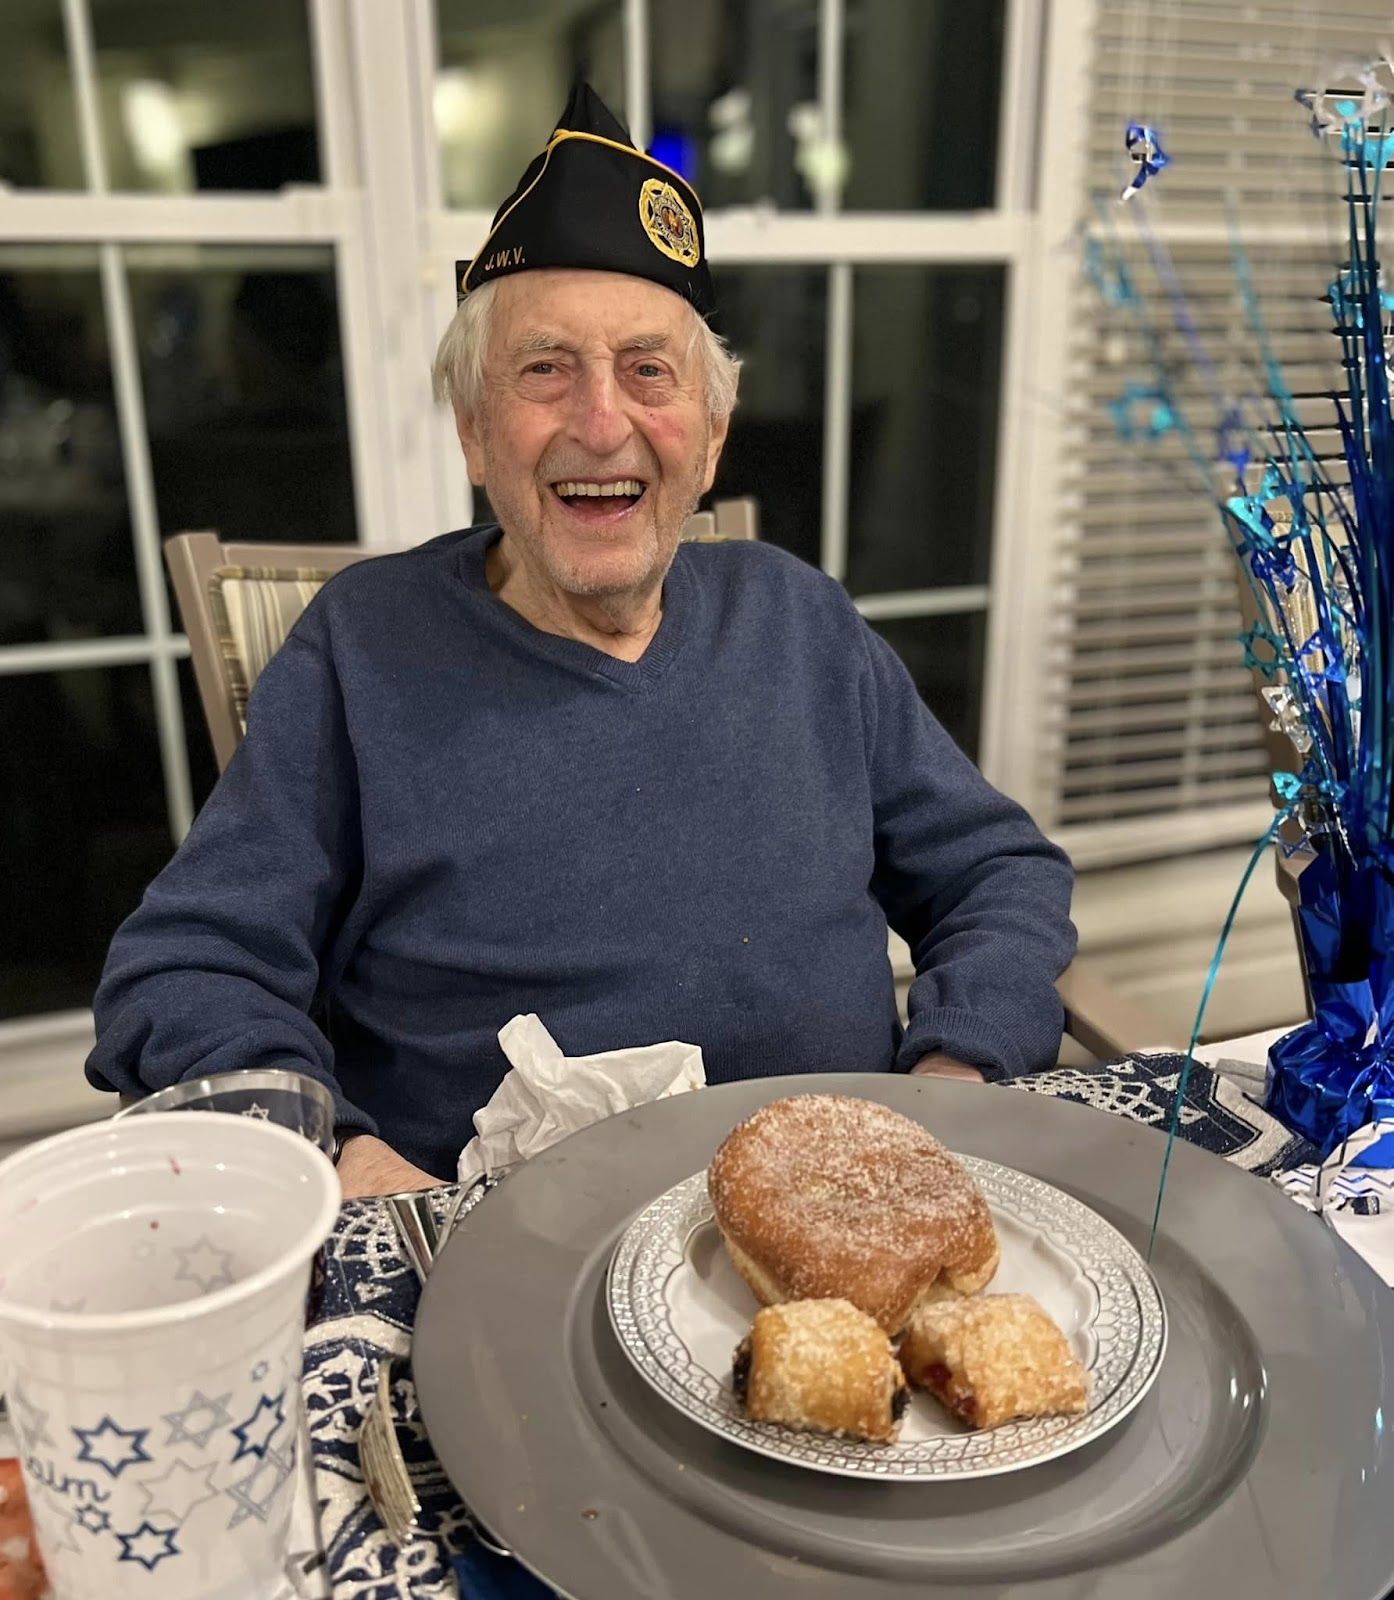 A smiling elderly man at a table with food in front of him